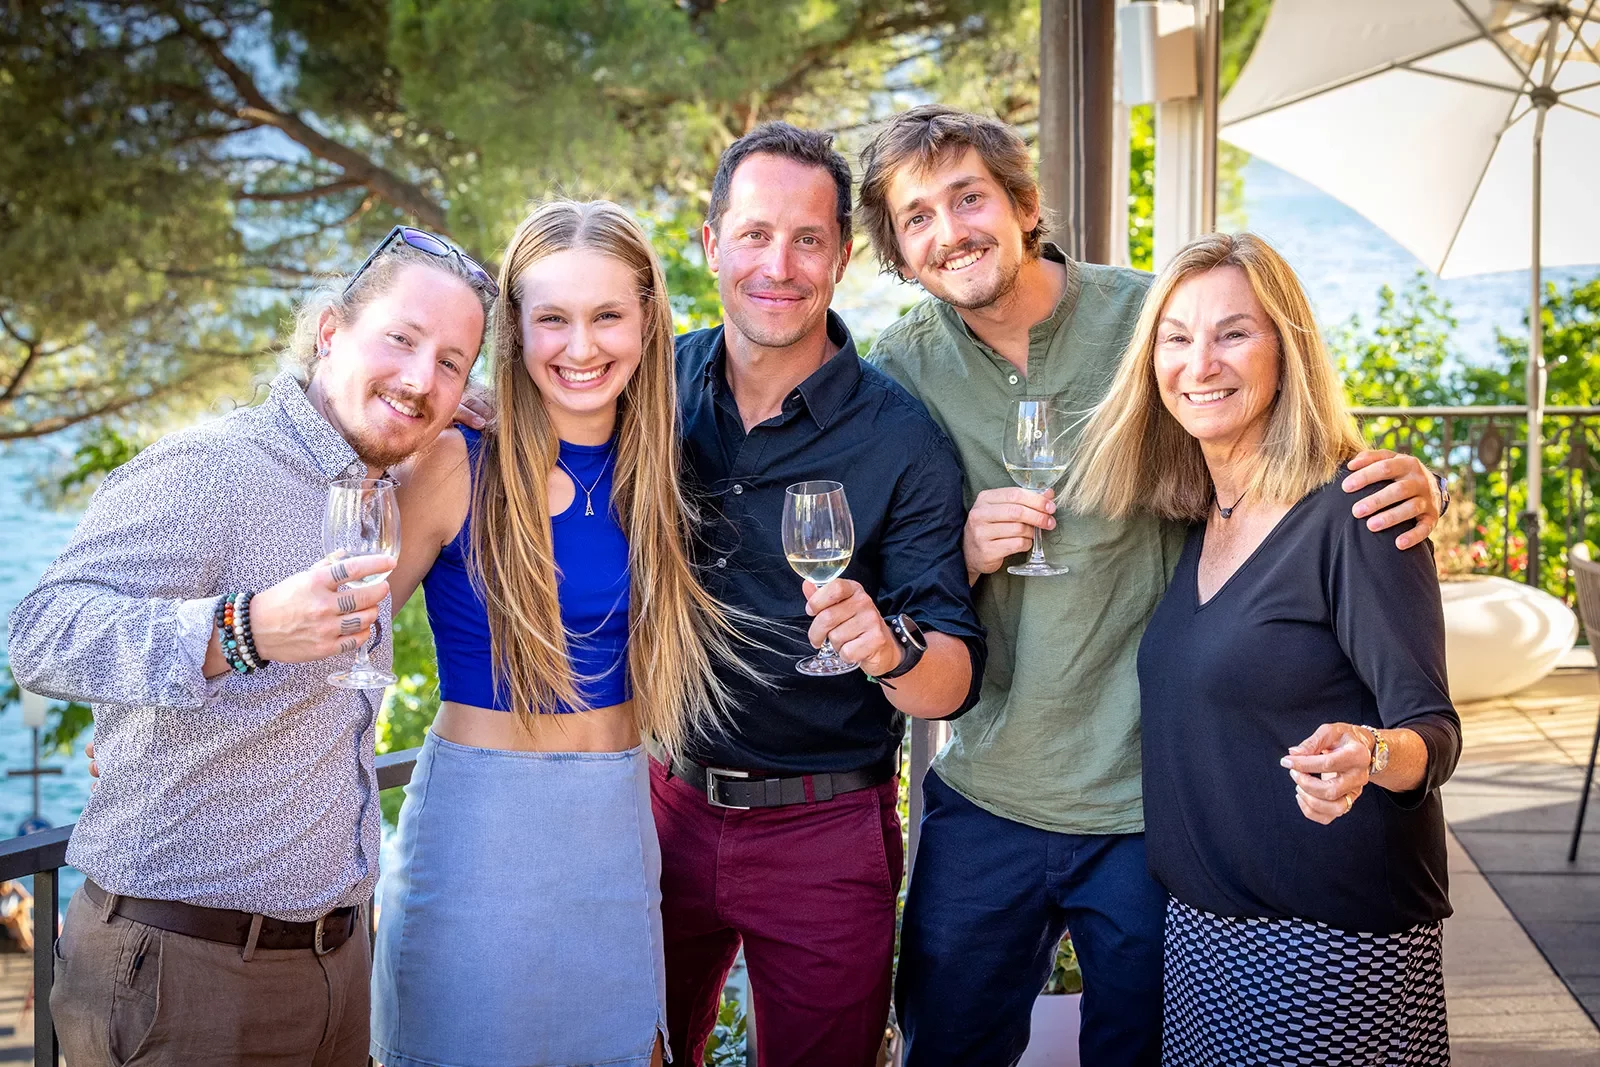 Five guests in nice clothes, wine glasses in hand smiling at camera.